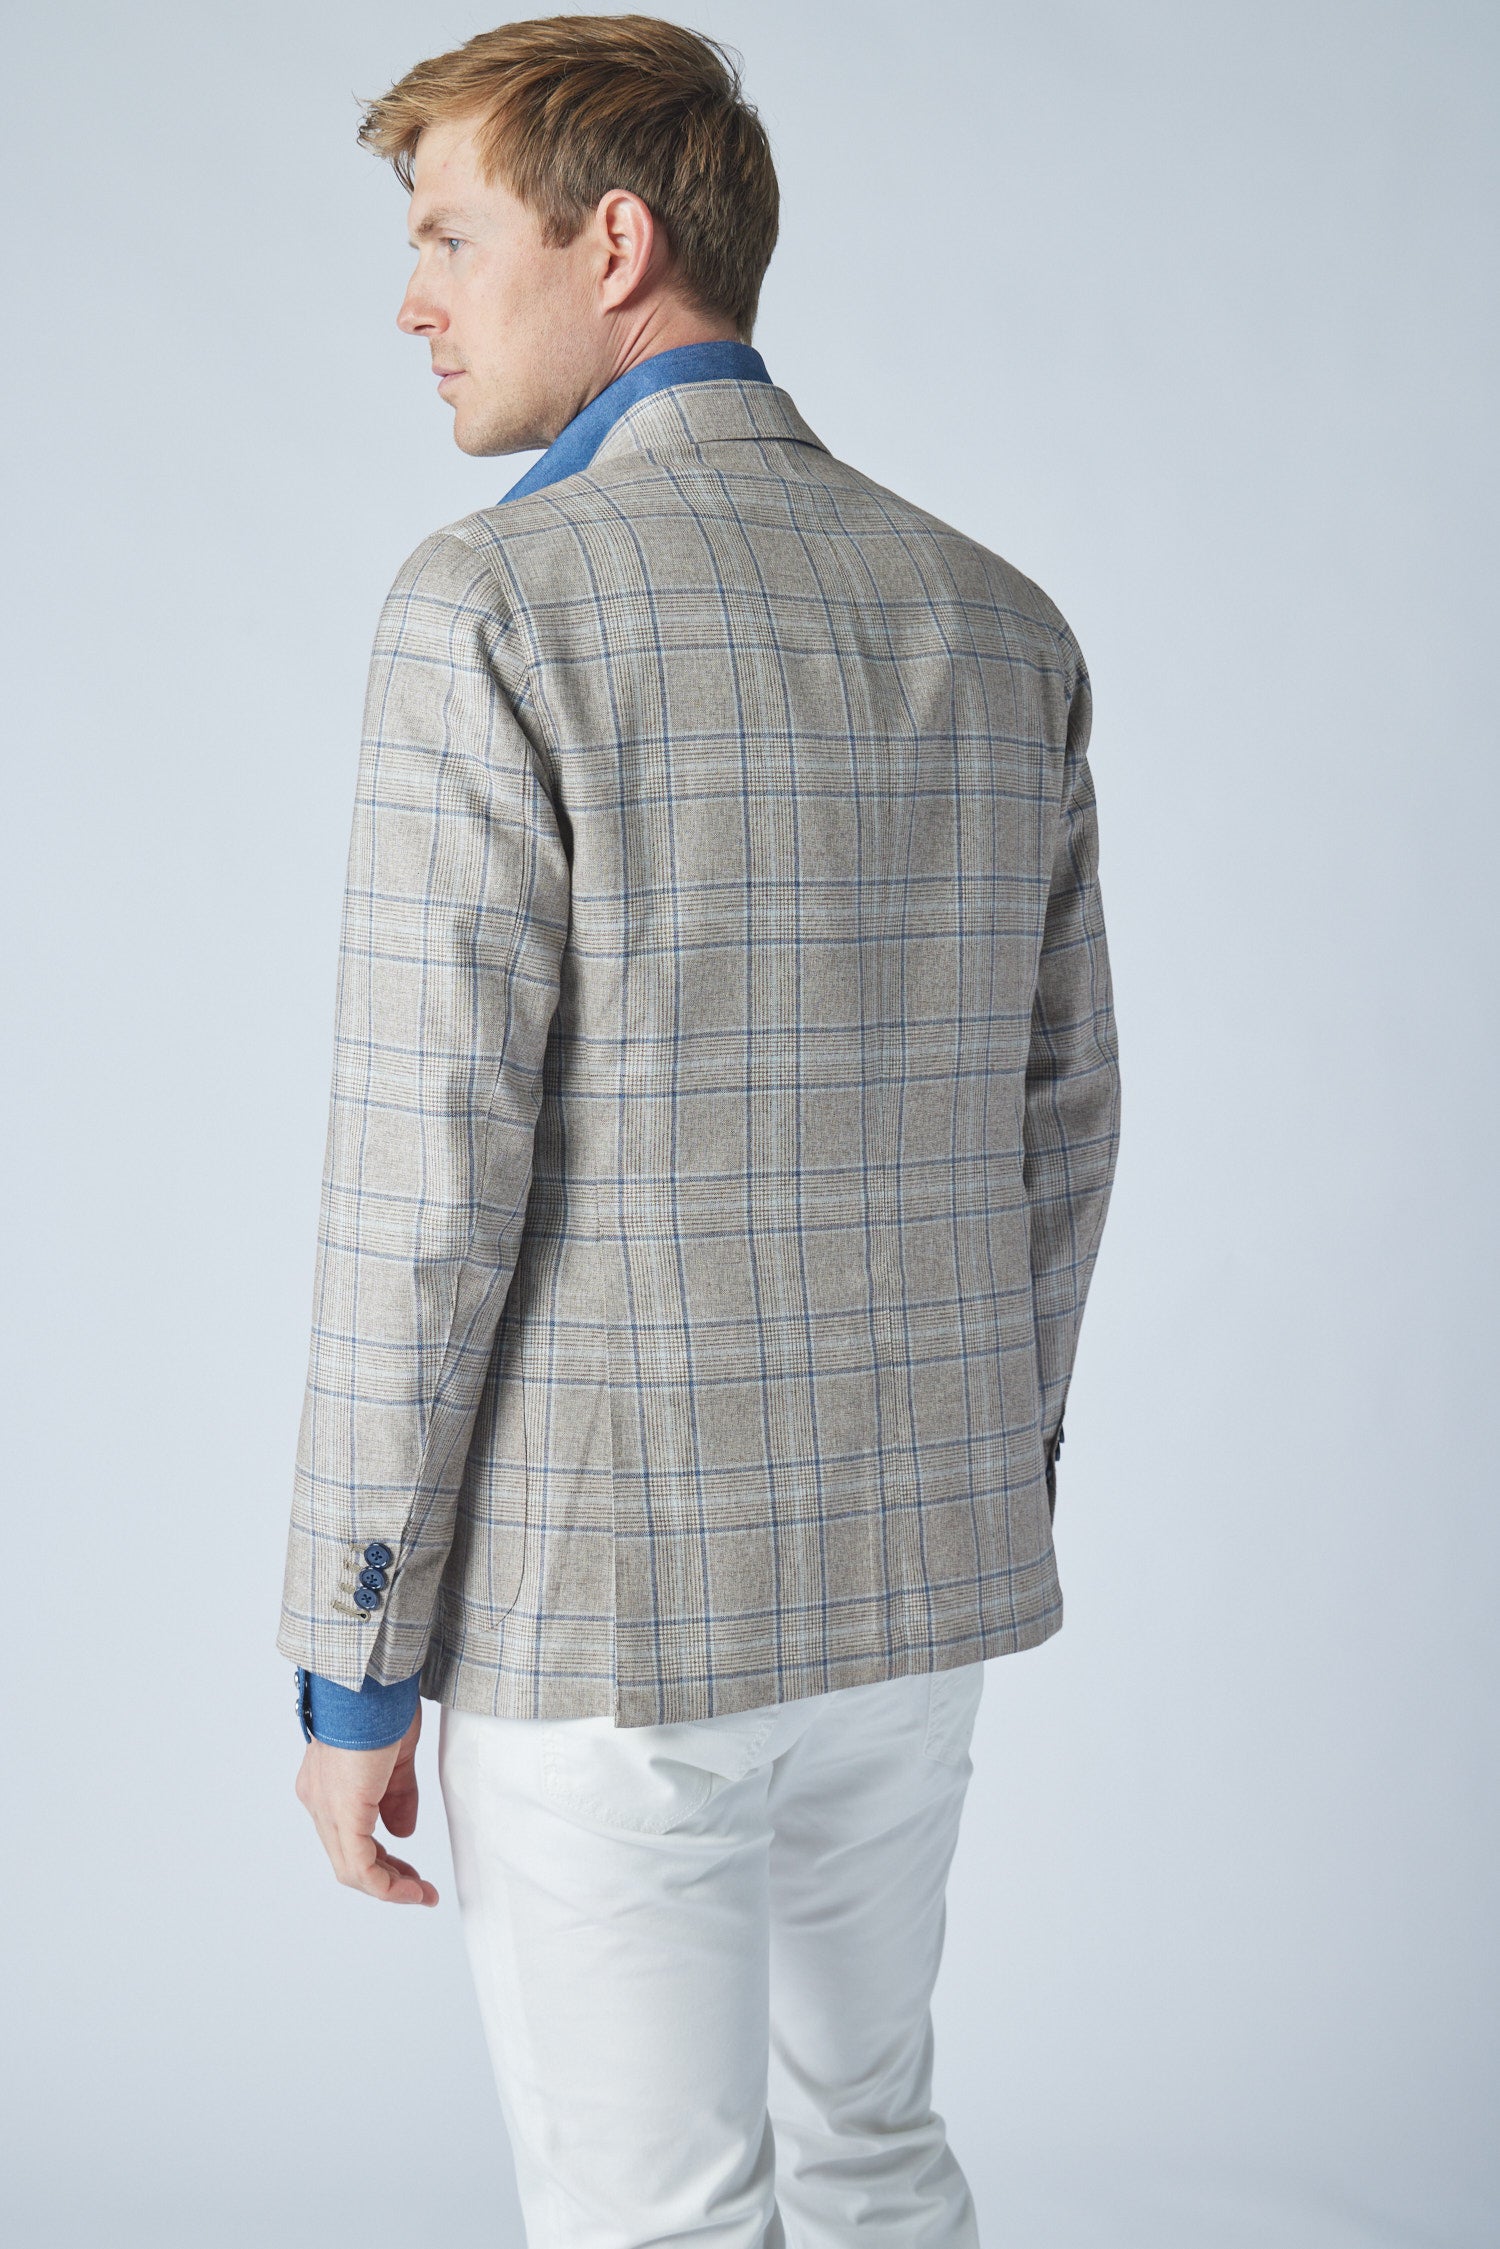 James Jacket in Tan with Blue Plaid